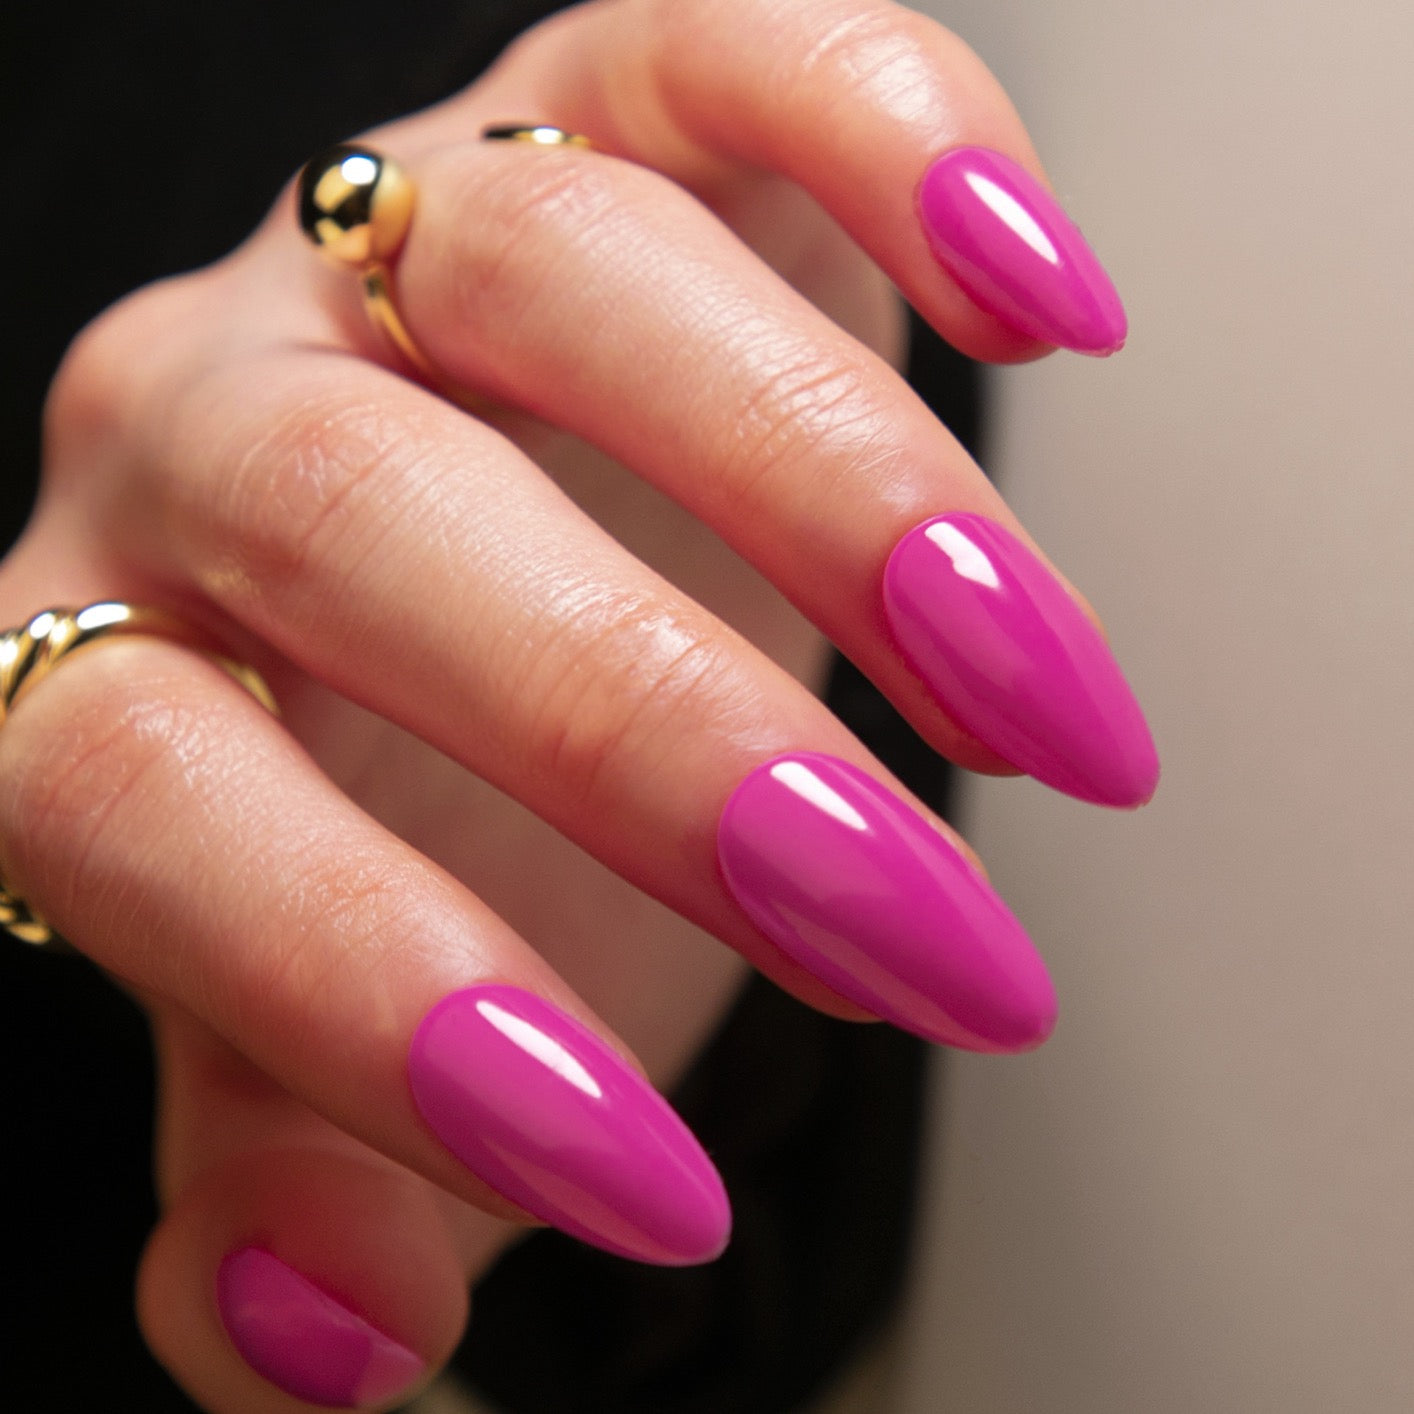 Vibrant Vogue Long Almond Shape Glossy Fuchsia Press On Nail Set with Golden Orb Accent